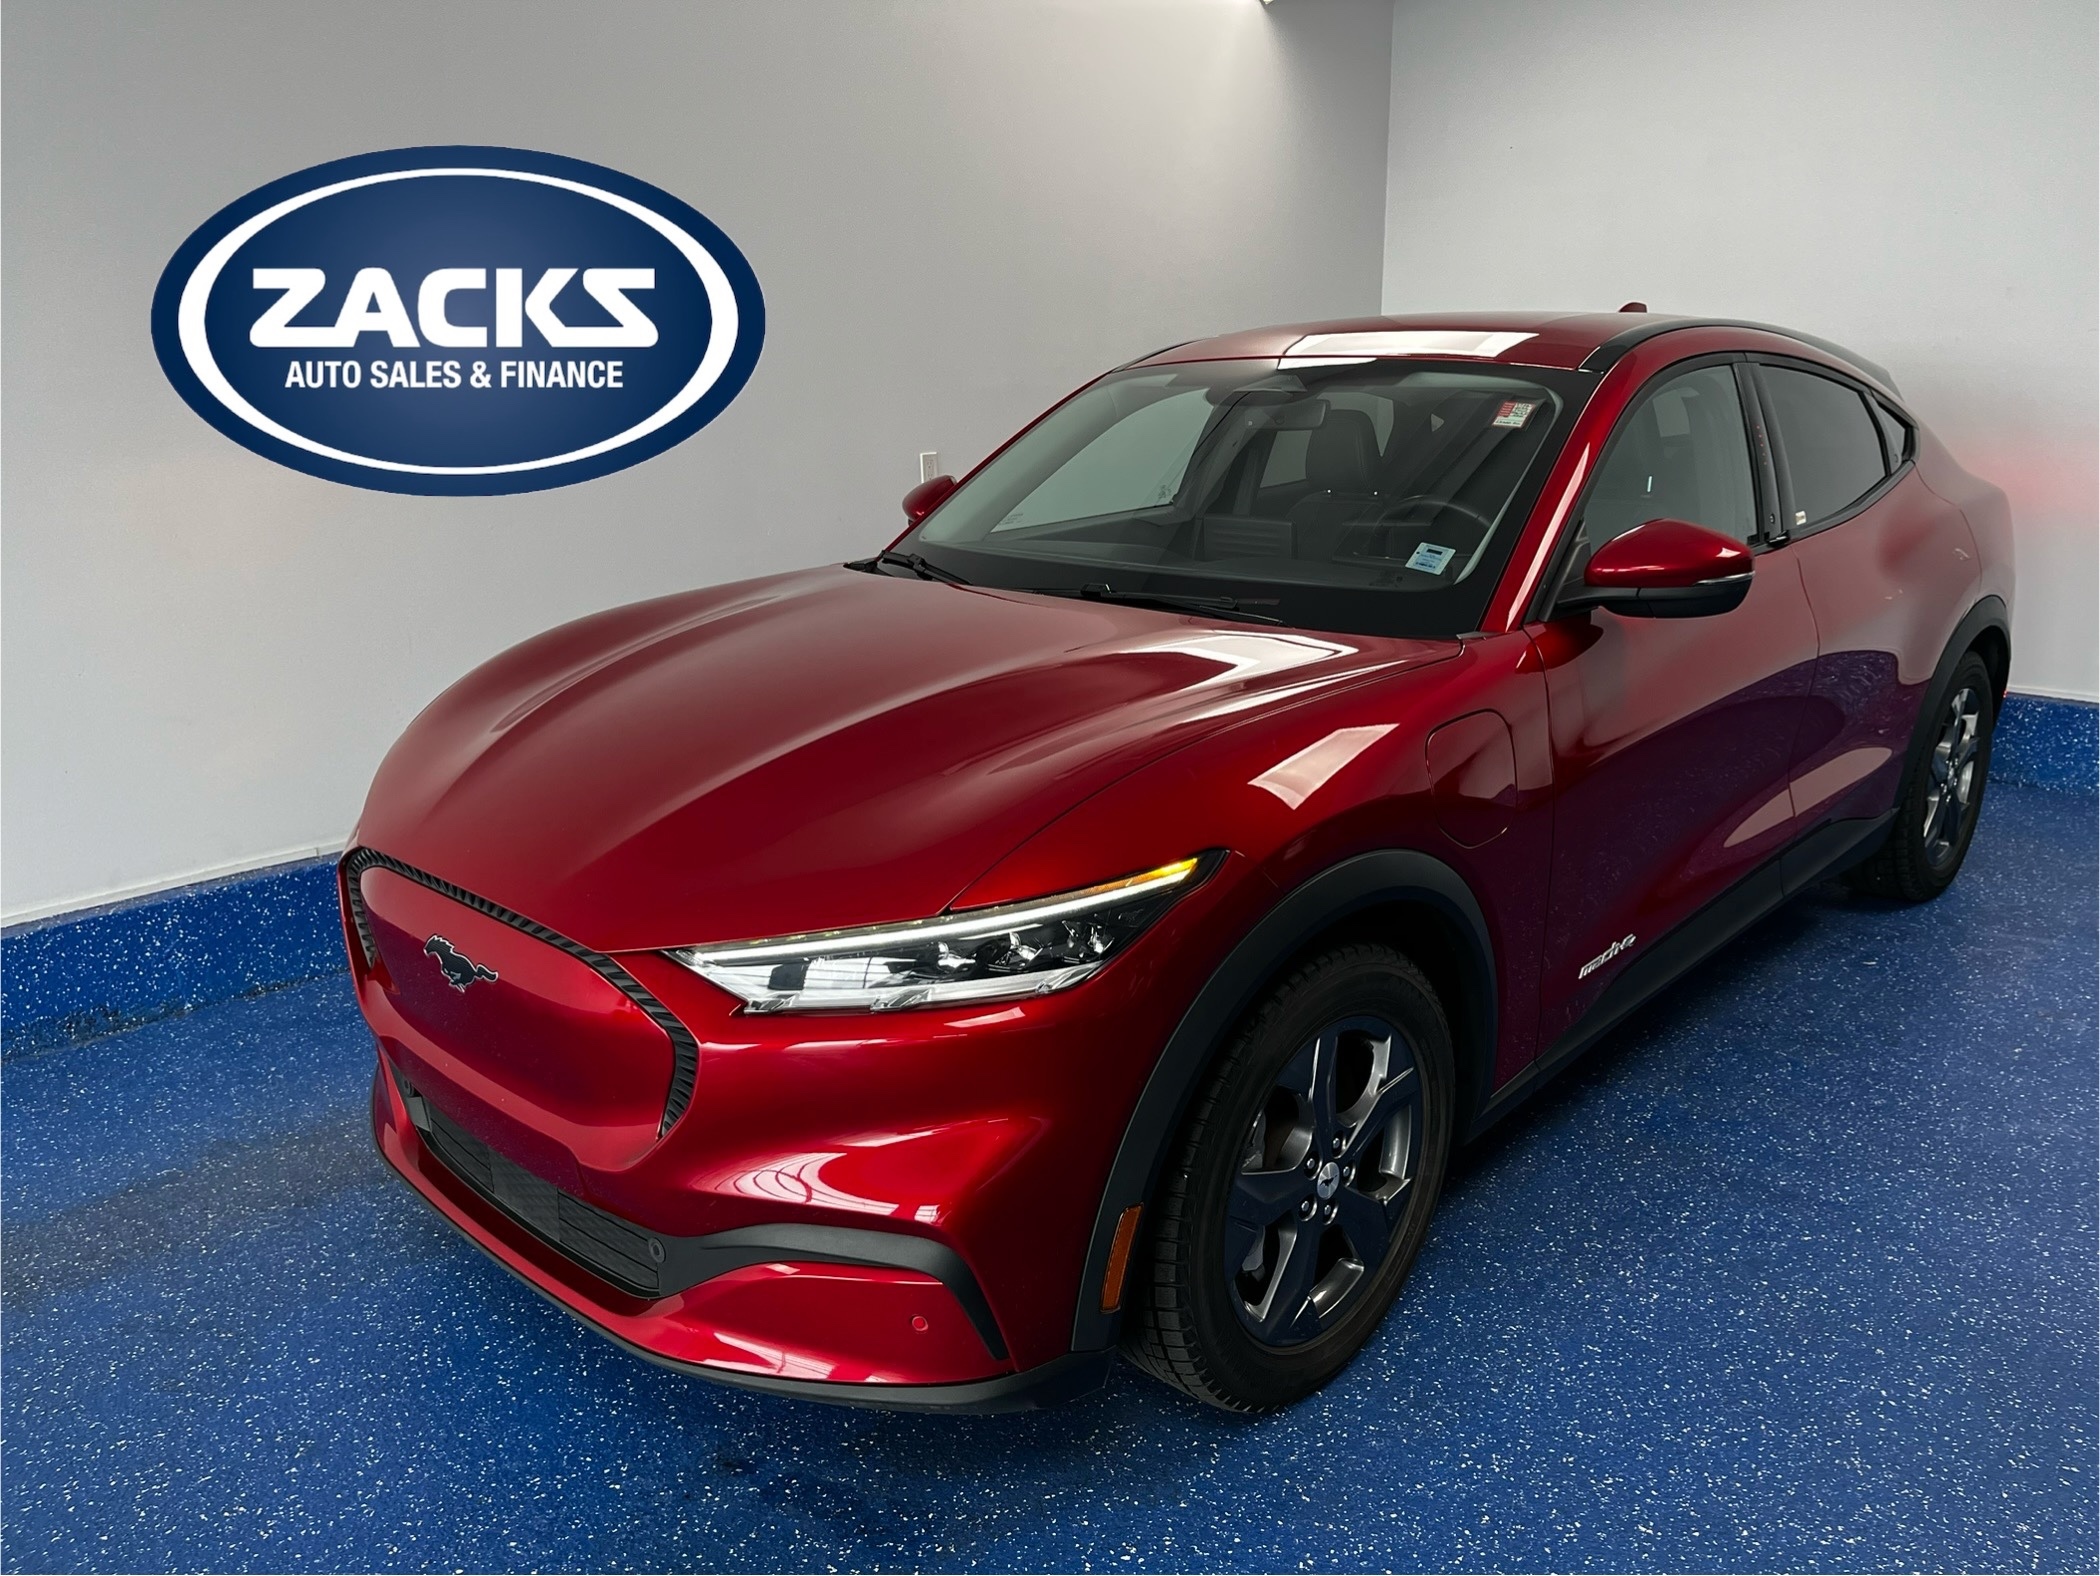 2022 Ford Mustang Mach-E Select AWD | Zacks Certified | Ask about Provincia